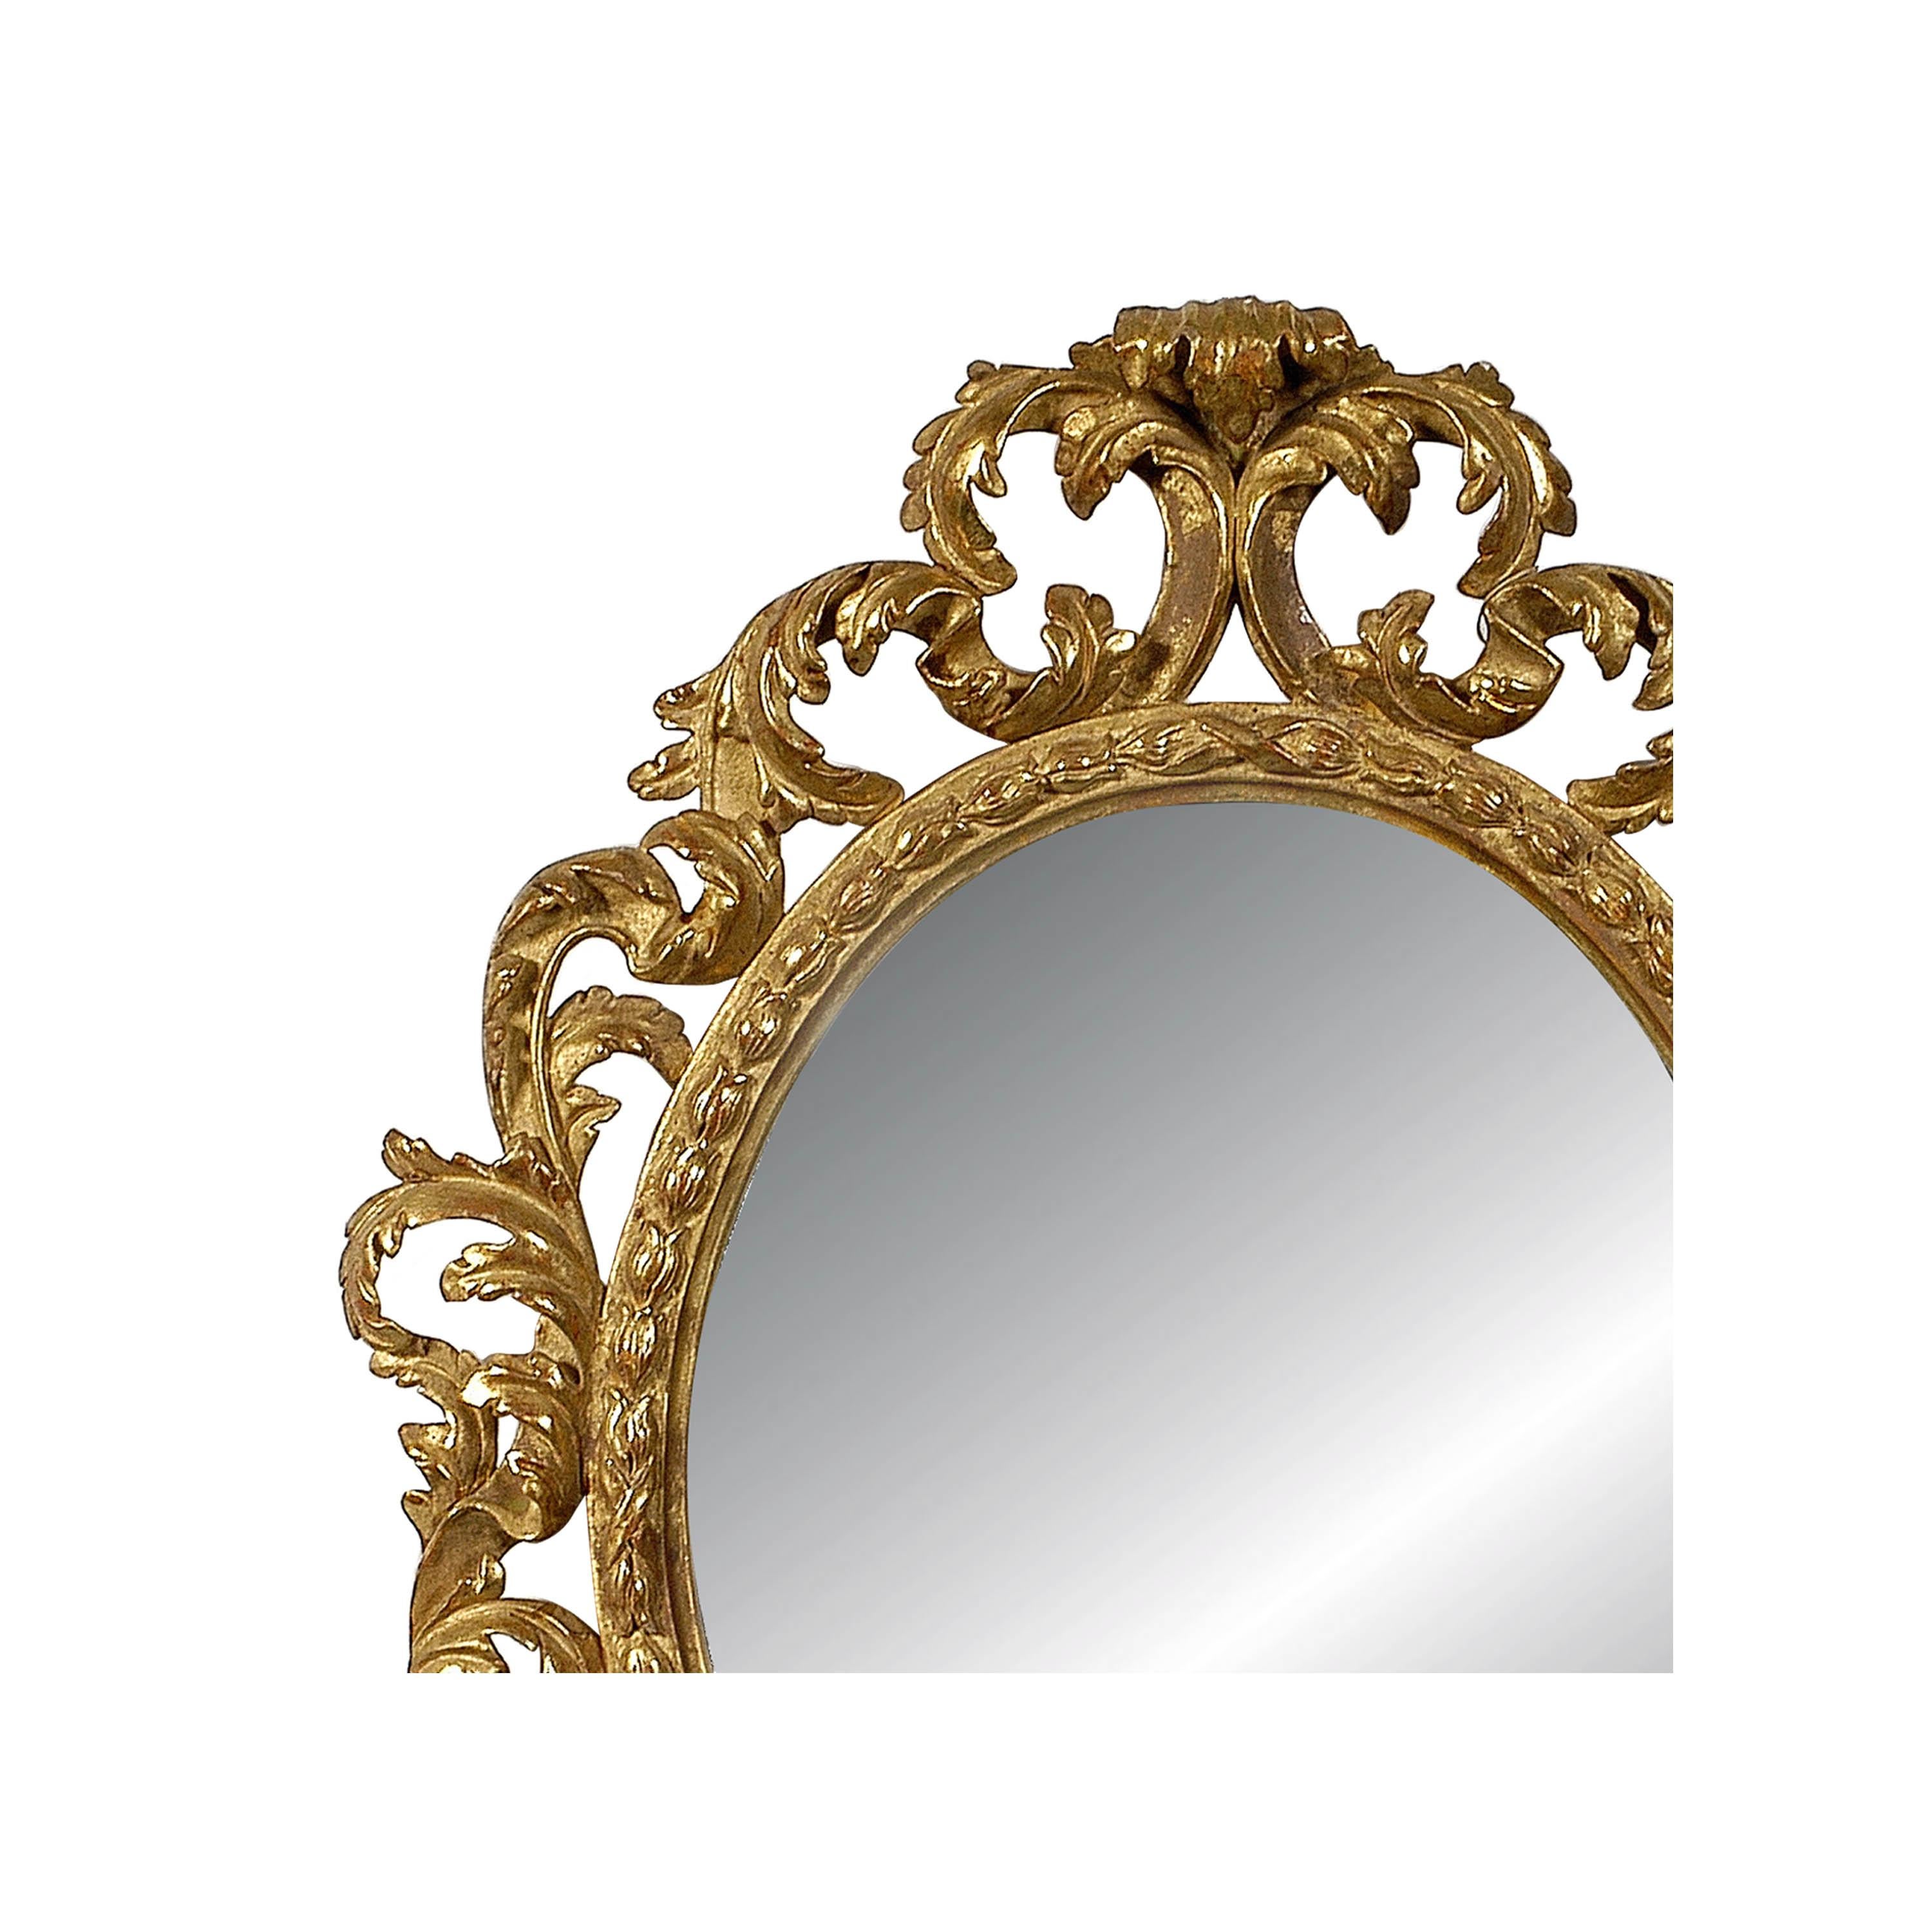 Neoclassical Baroque style handcrafted mirror. Hand carved wooden structure with gold foil finished, Spain, 1970.